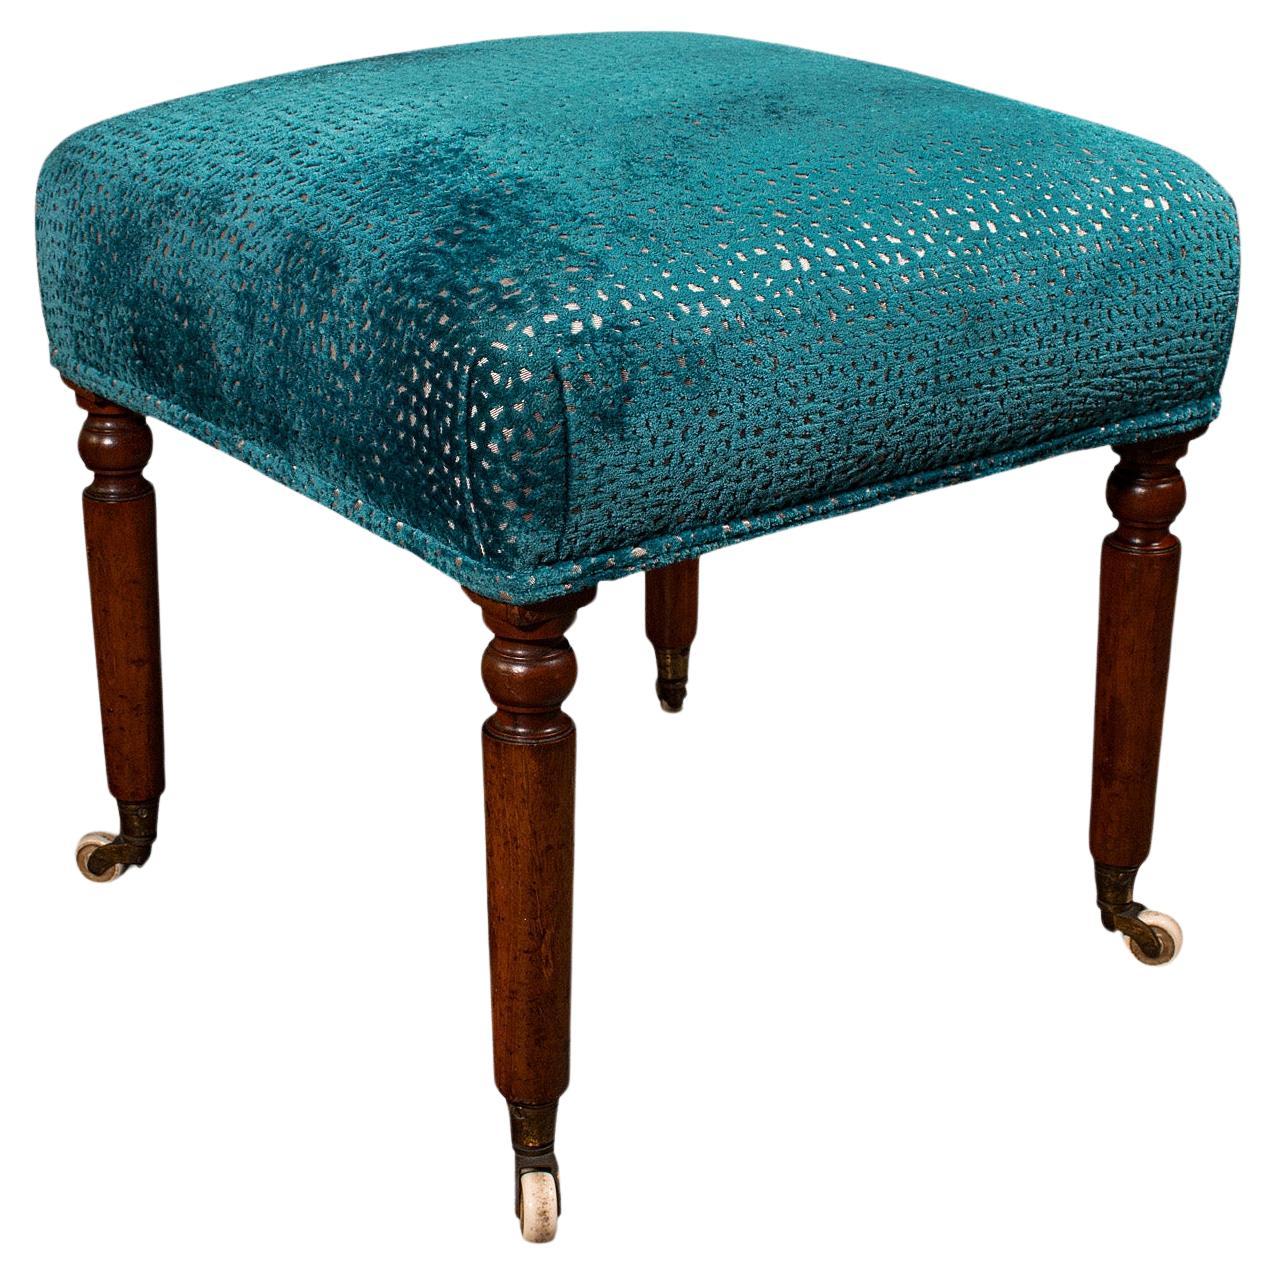 Antique Dressing Stool, English, Chenille Upholstery, Footstool, Regency, C.1820 For Sale